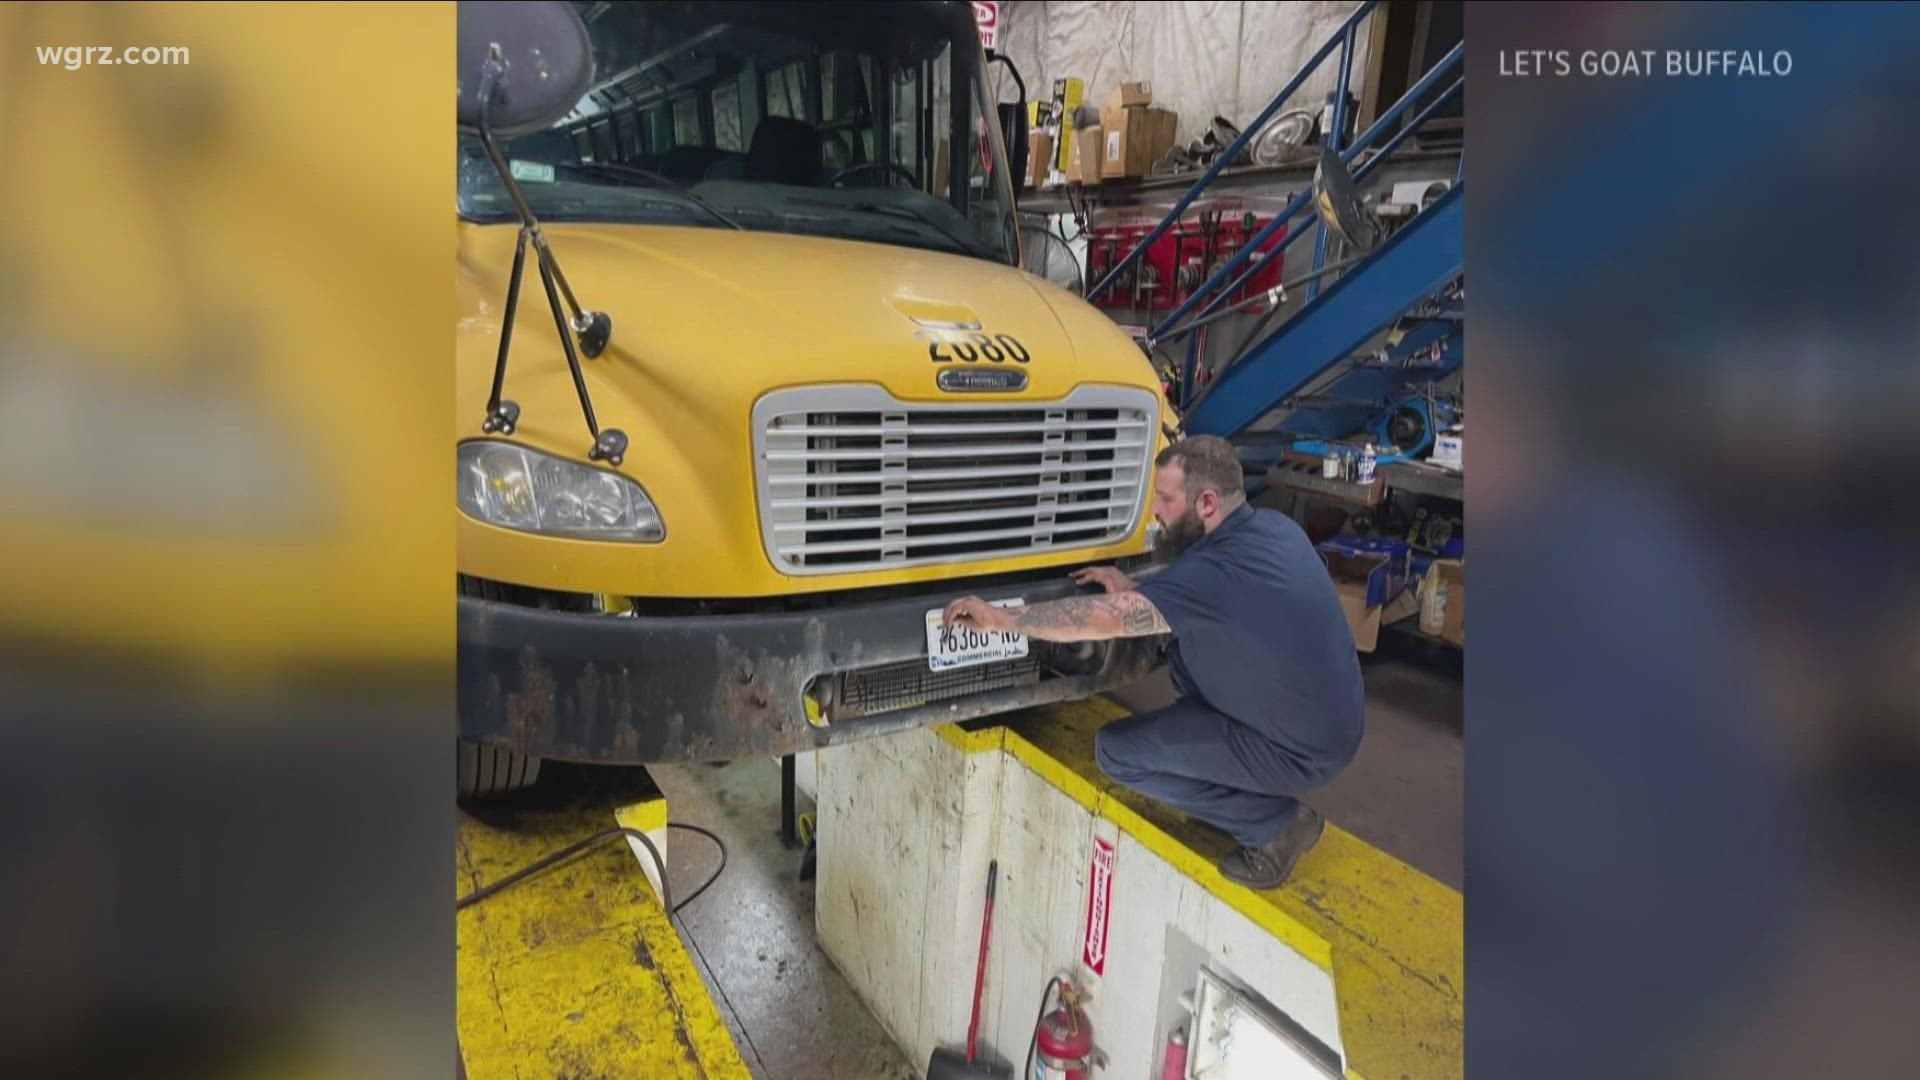 Let's Goat Buffalo posted on Facebook that a father and son duo at American Performance and Manufacturing in Amherst are giving the company a new bus.